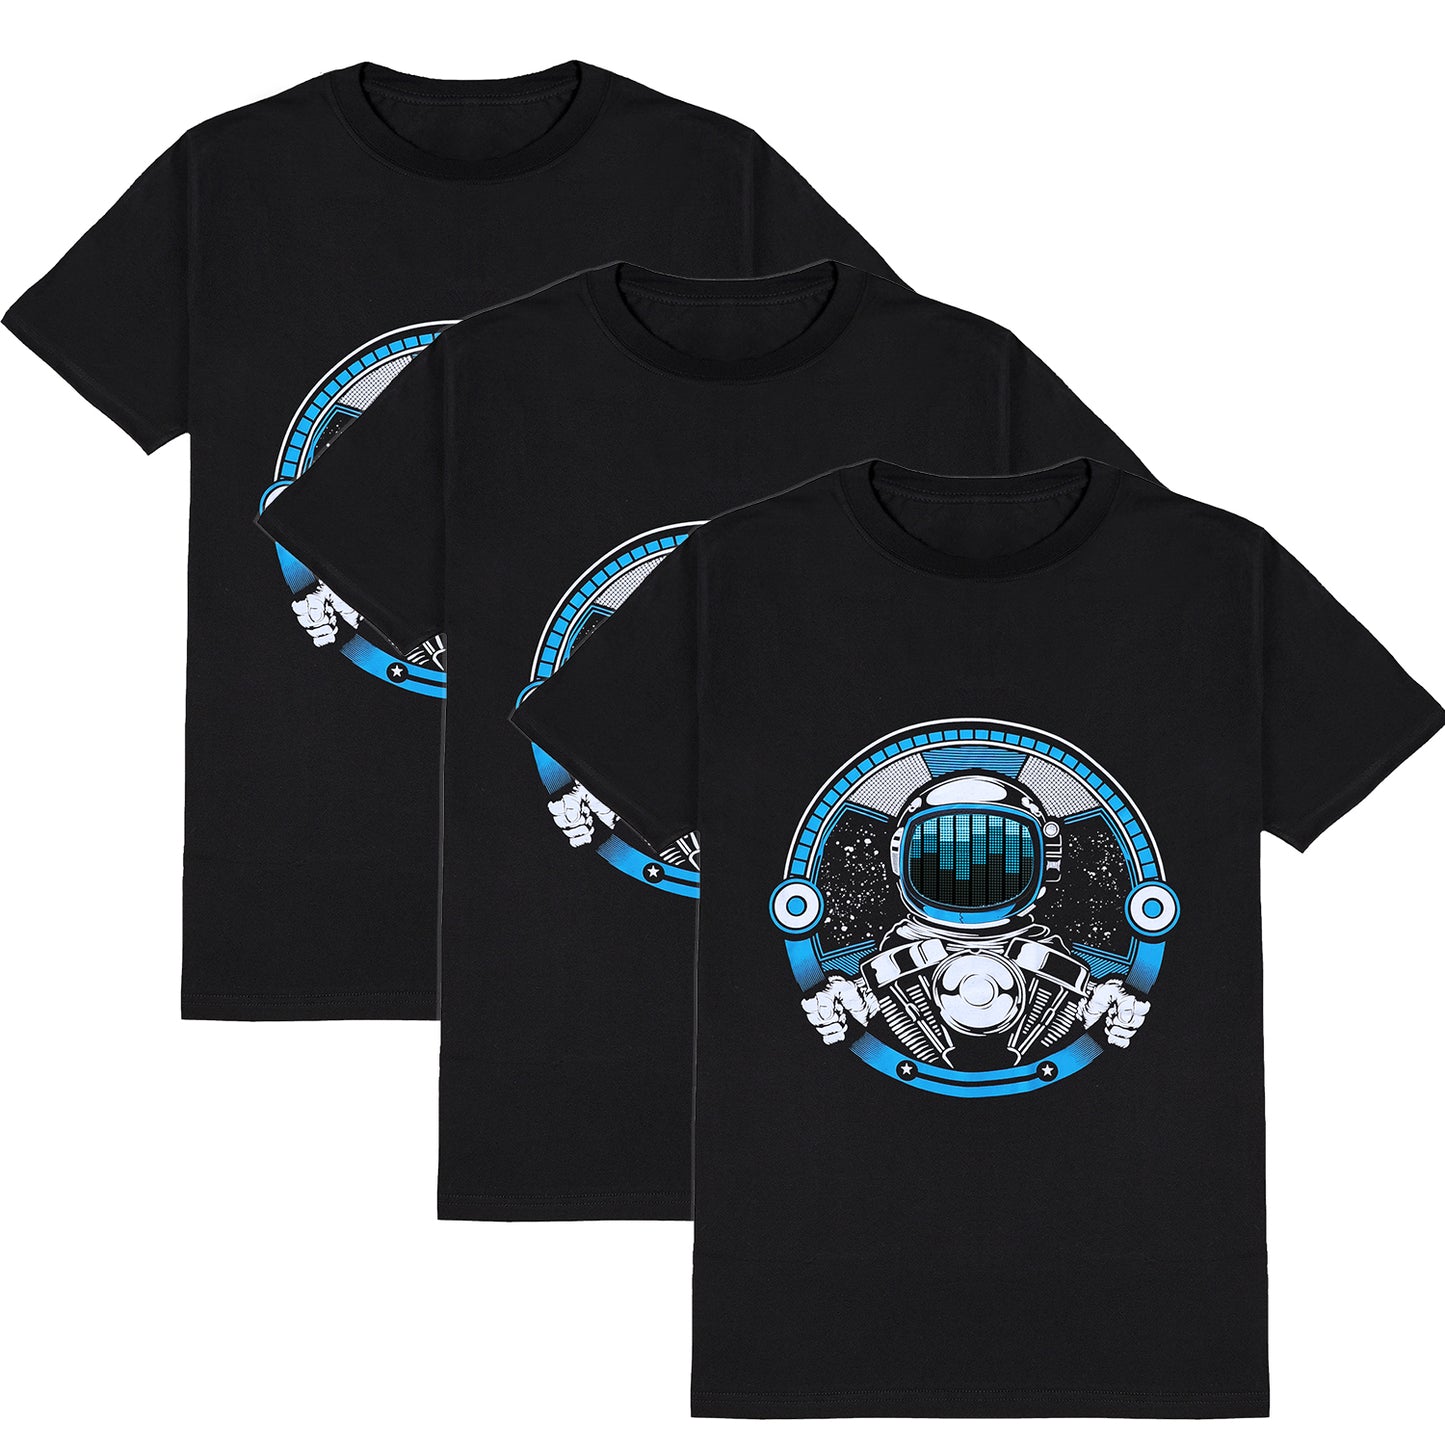 LED T Shirt Sound Activated Glow Shirts Light up Equalizer Clothes for Party(Astronaut)